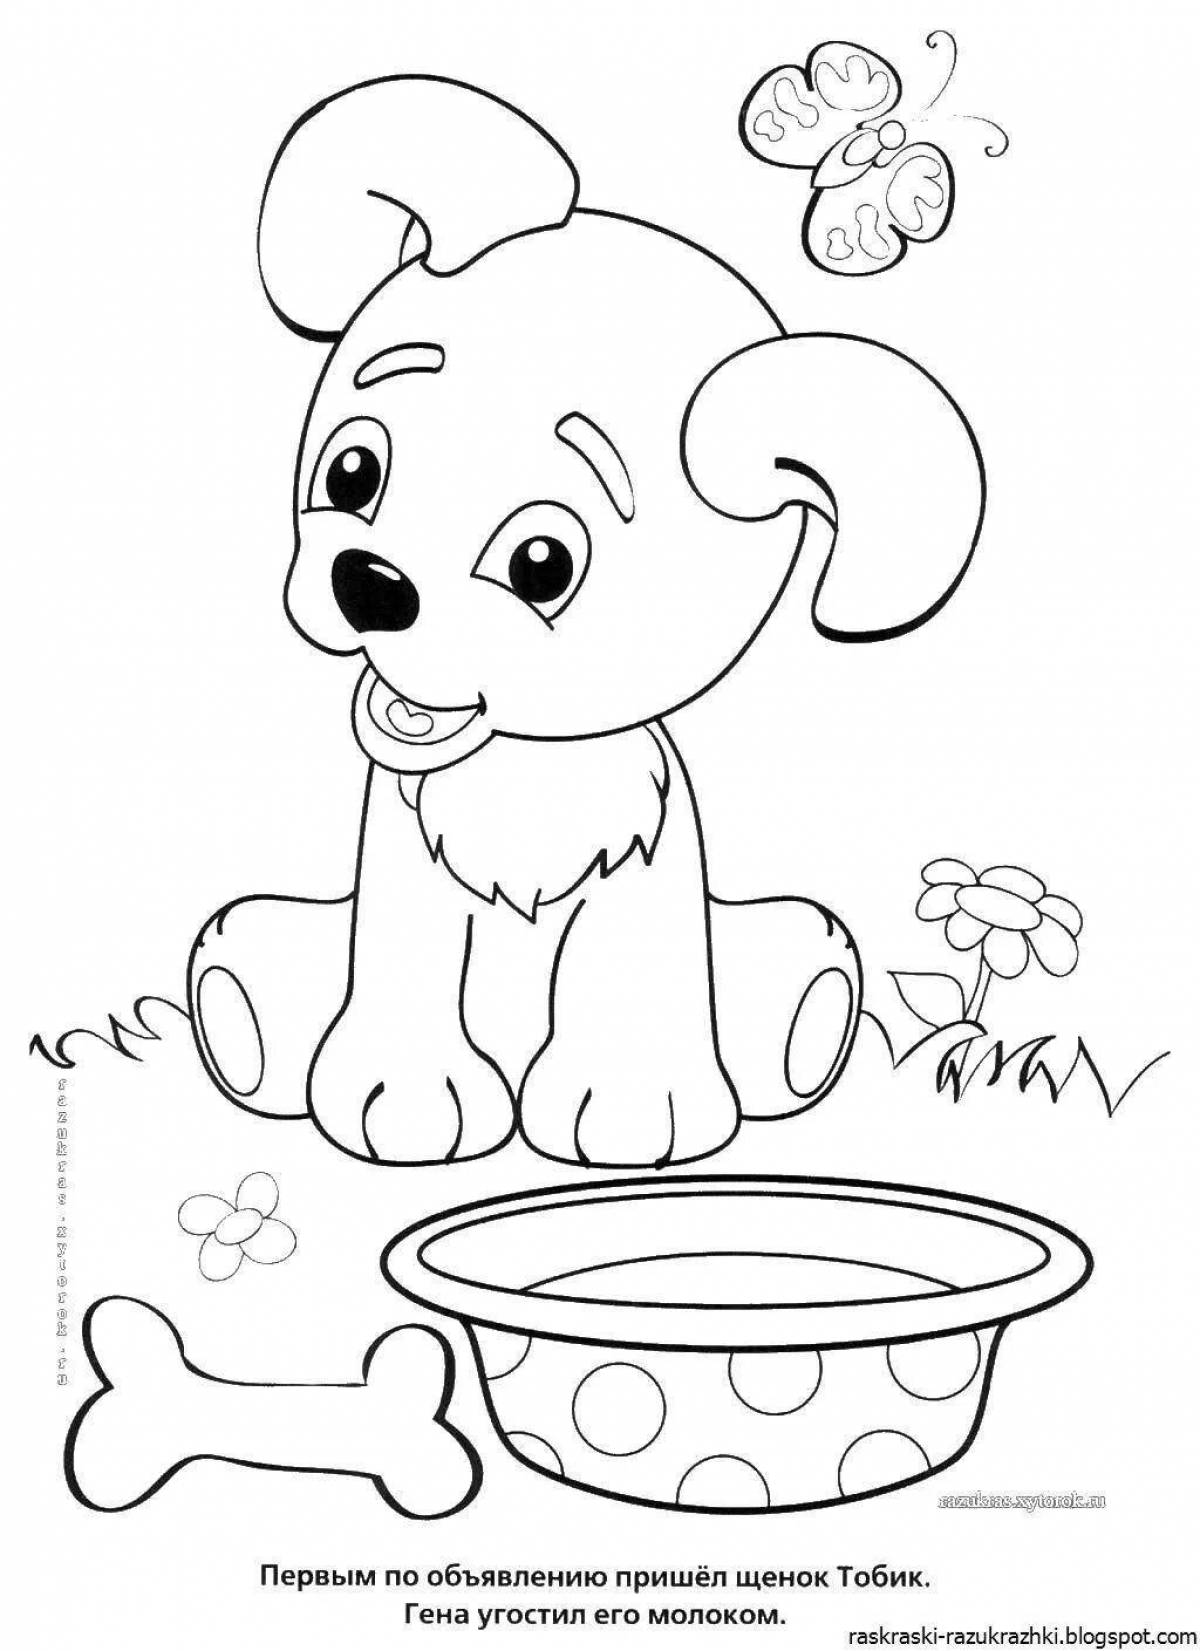 Playful dog coloring book for kids